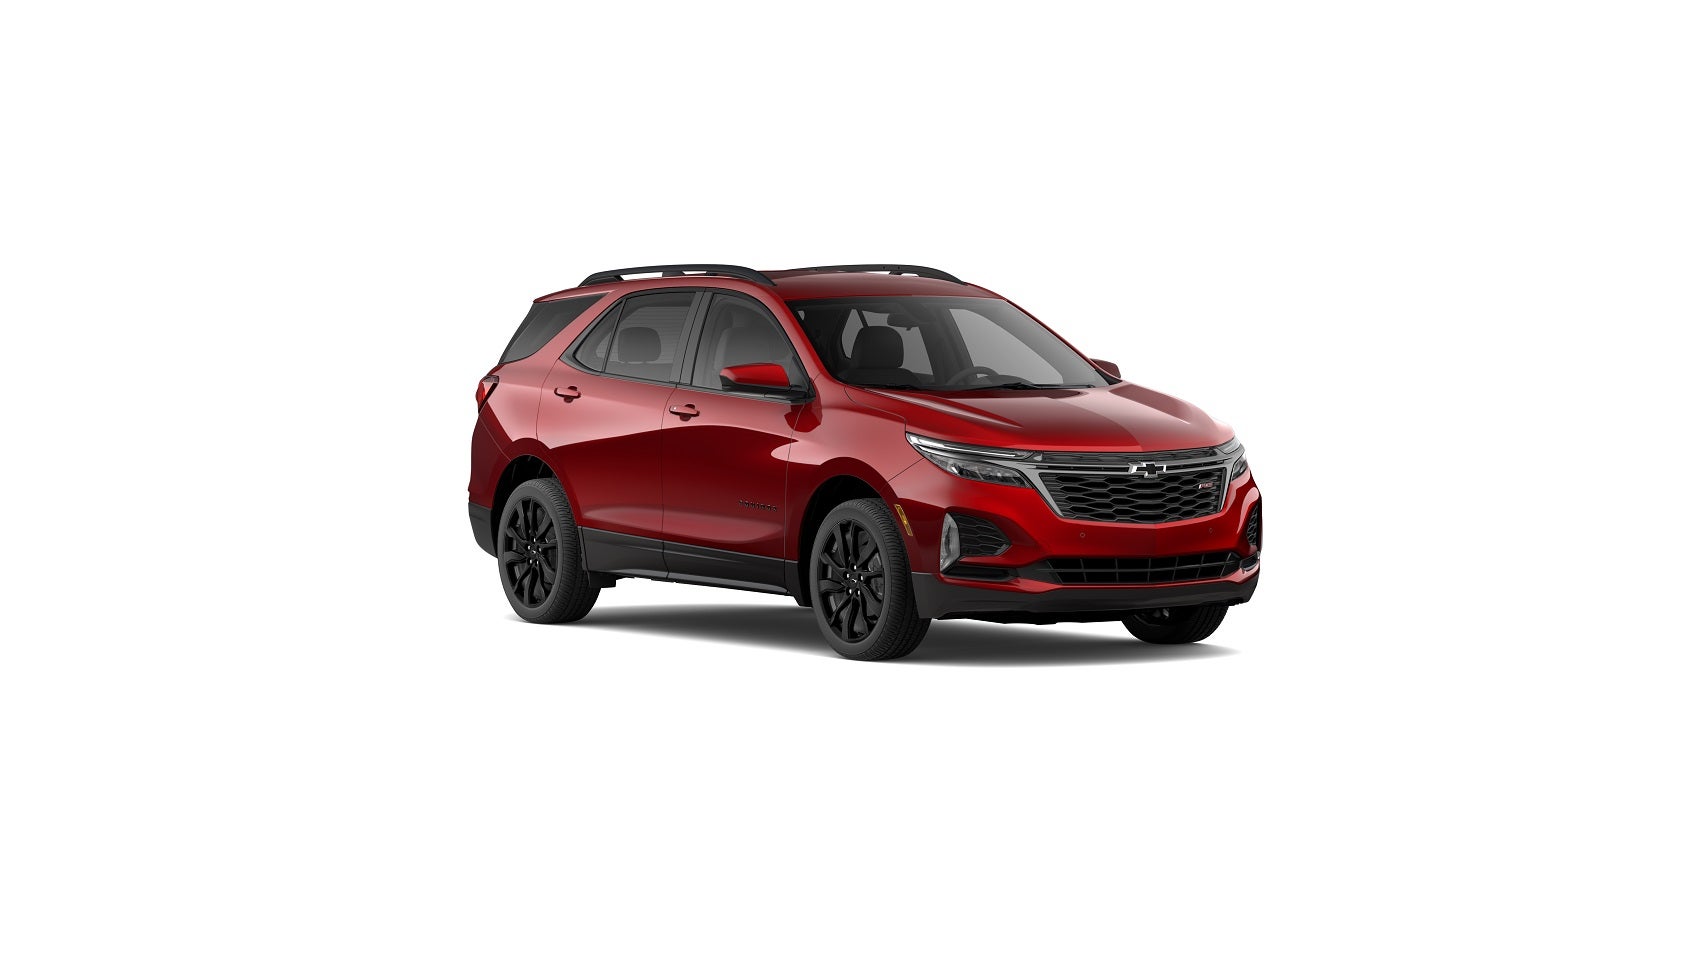 About the Chevy Equinox